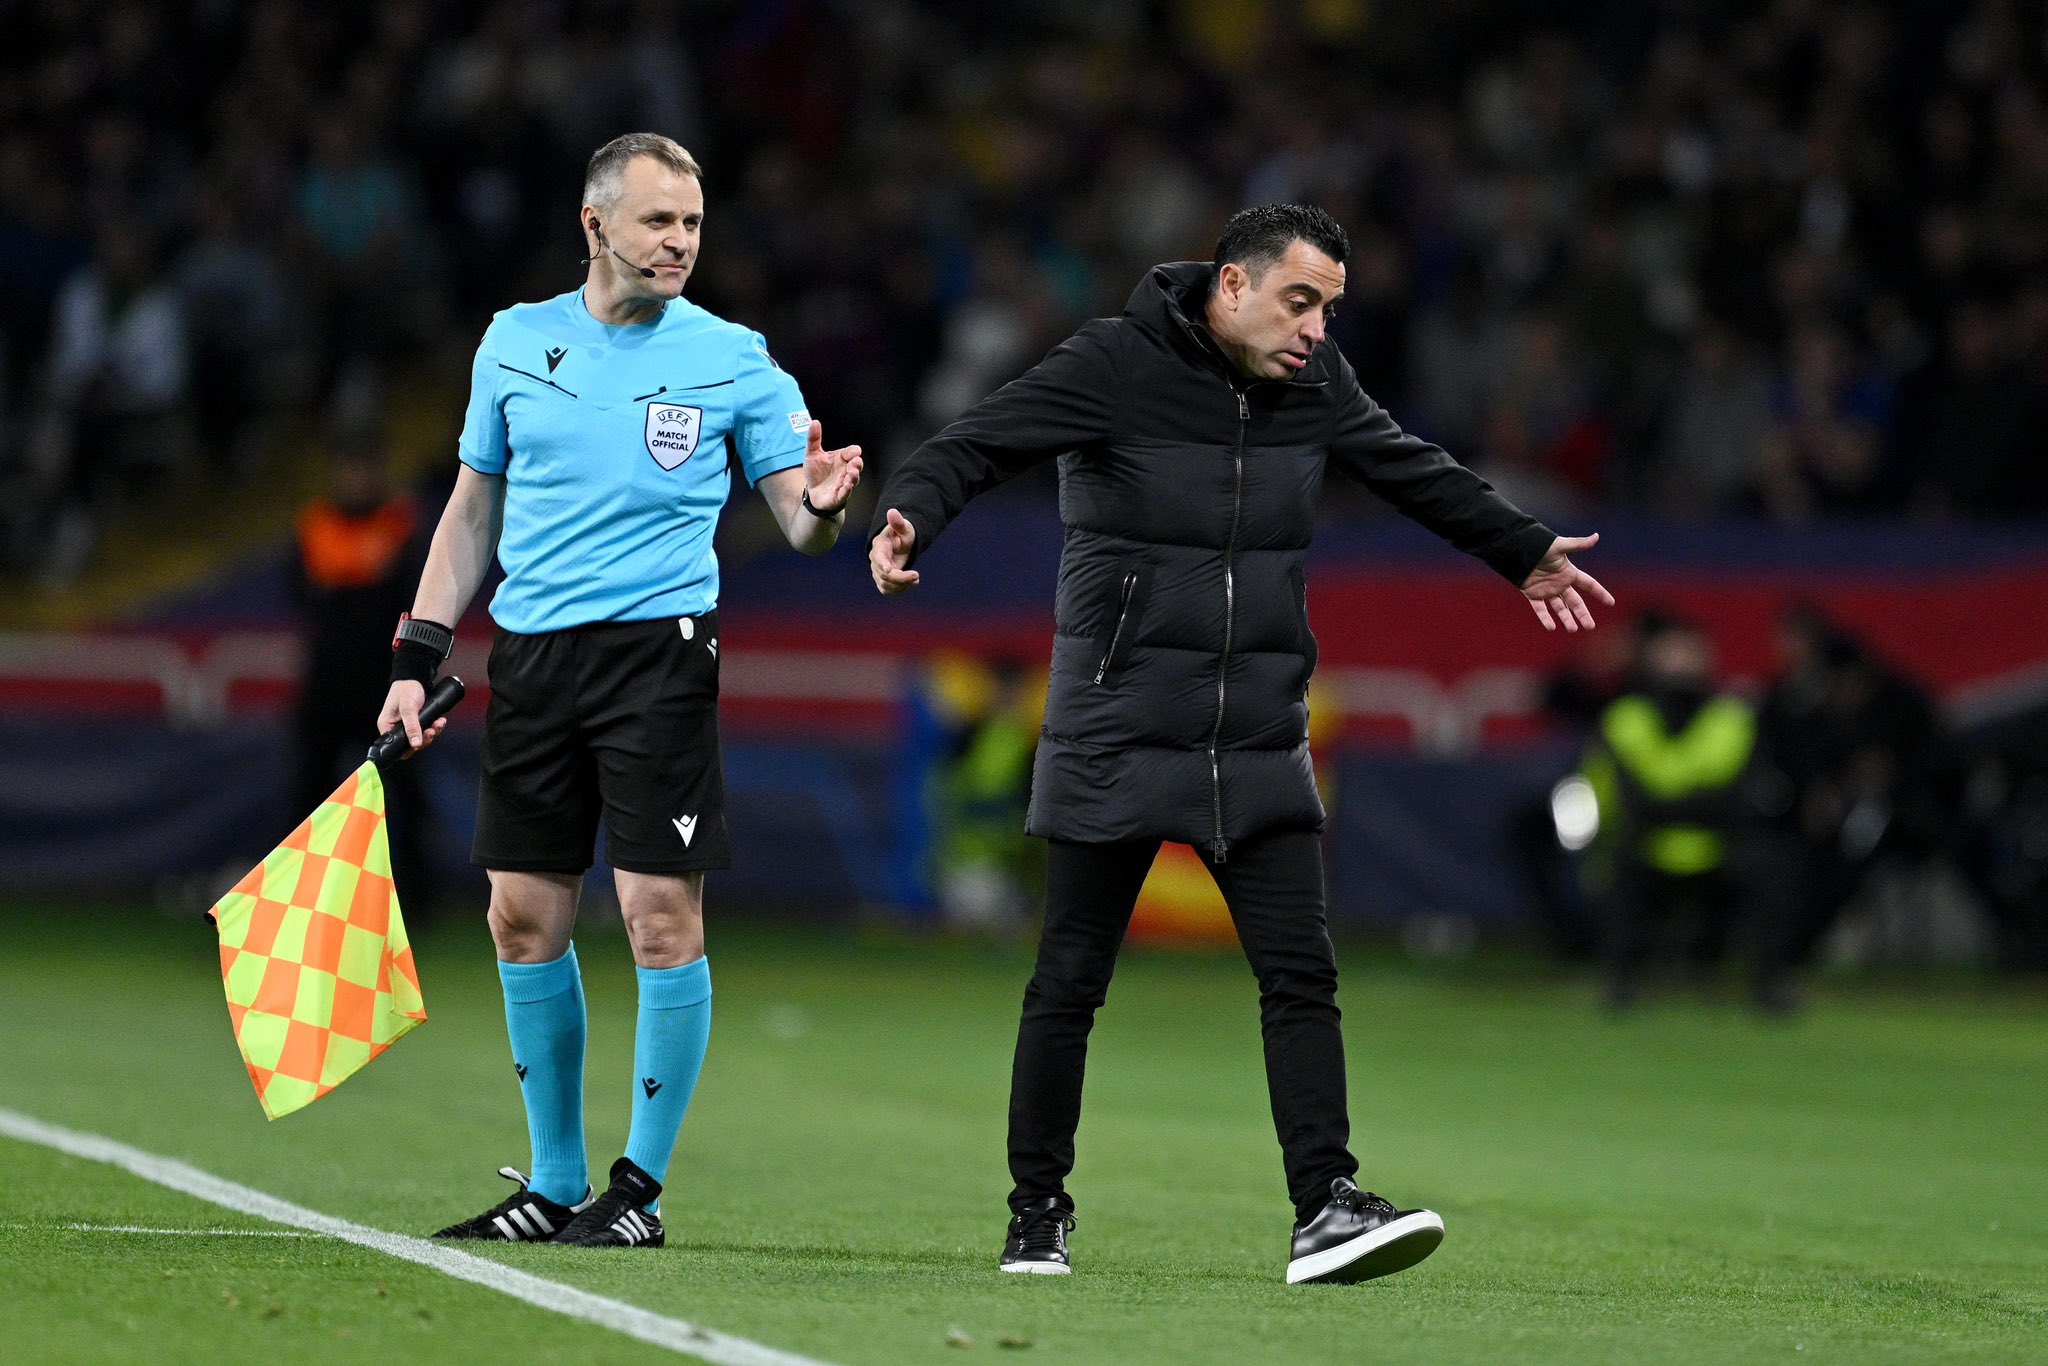 “He’s been a disaster” – Xavi Hernandez blames referee for Barcelona’s Champions League exit